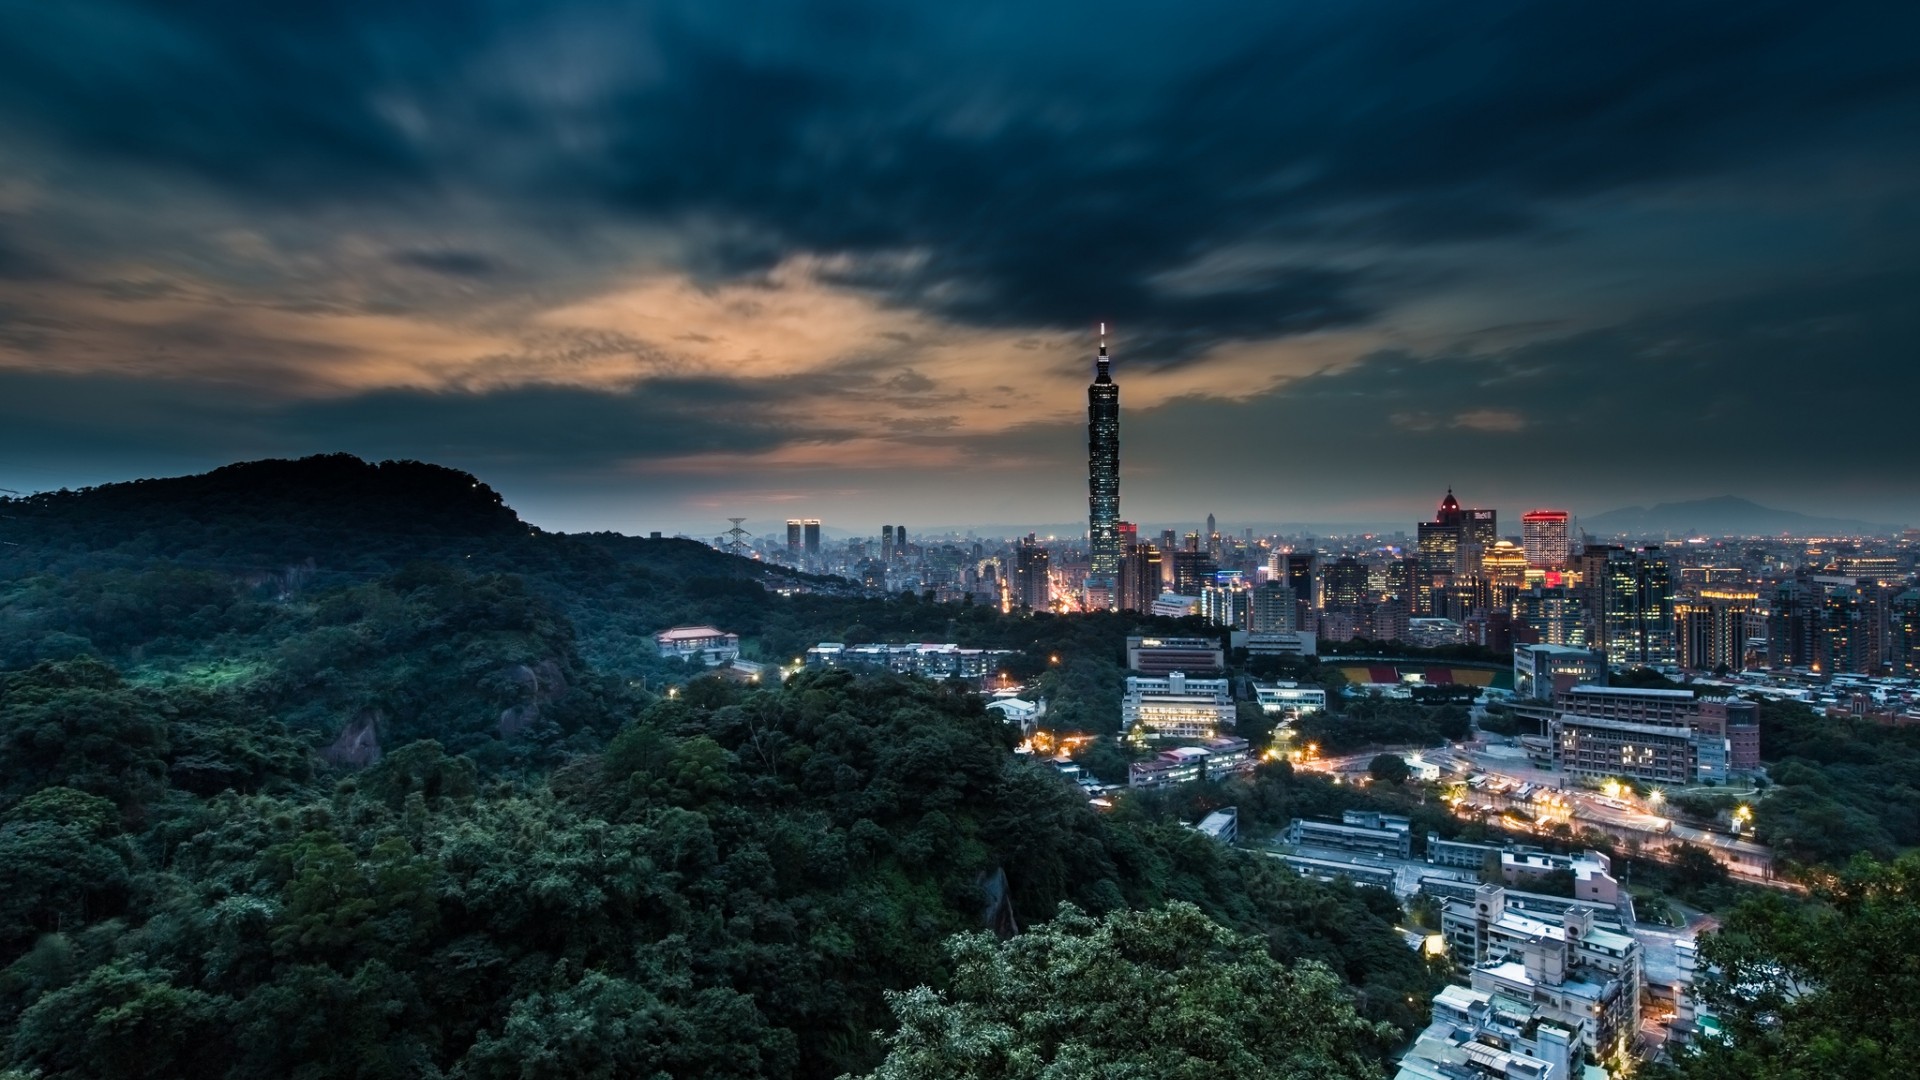 architecture, Cityscape, Evening, Clouds, Sunset, Lights, Taiwan, Building, Skyscraper, Trees, Hill, Long exposure, Street, Taipei, Taipei 101 Wallpaper